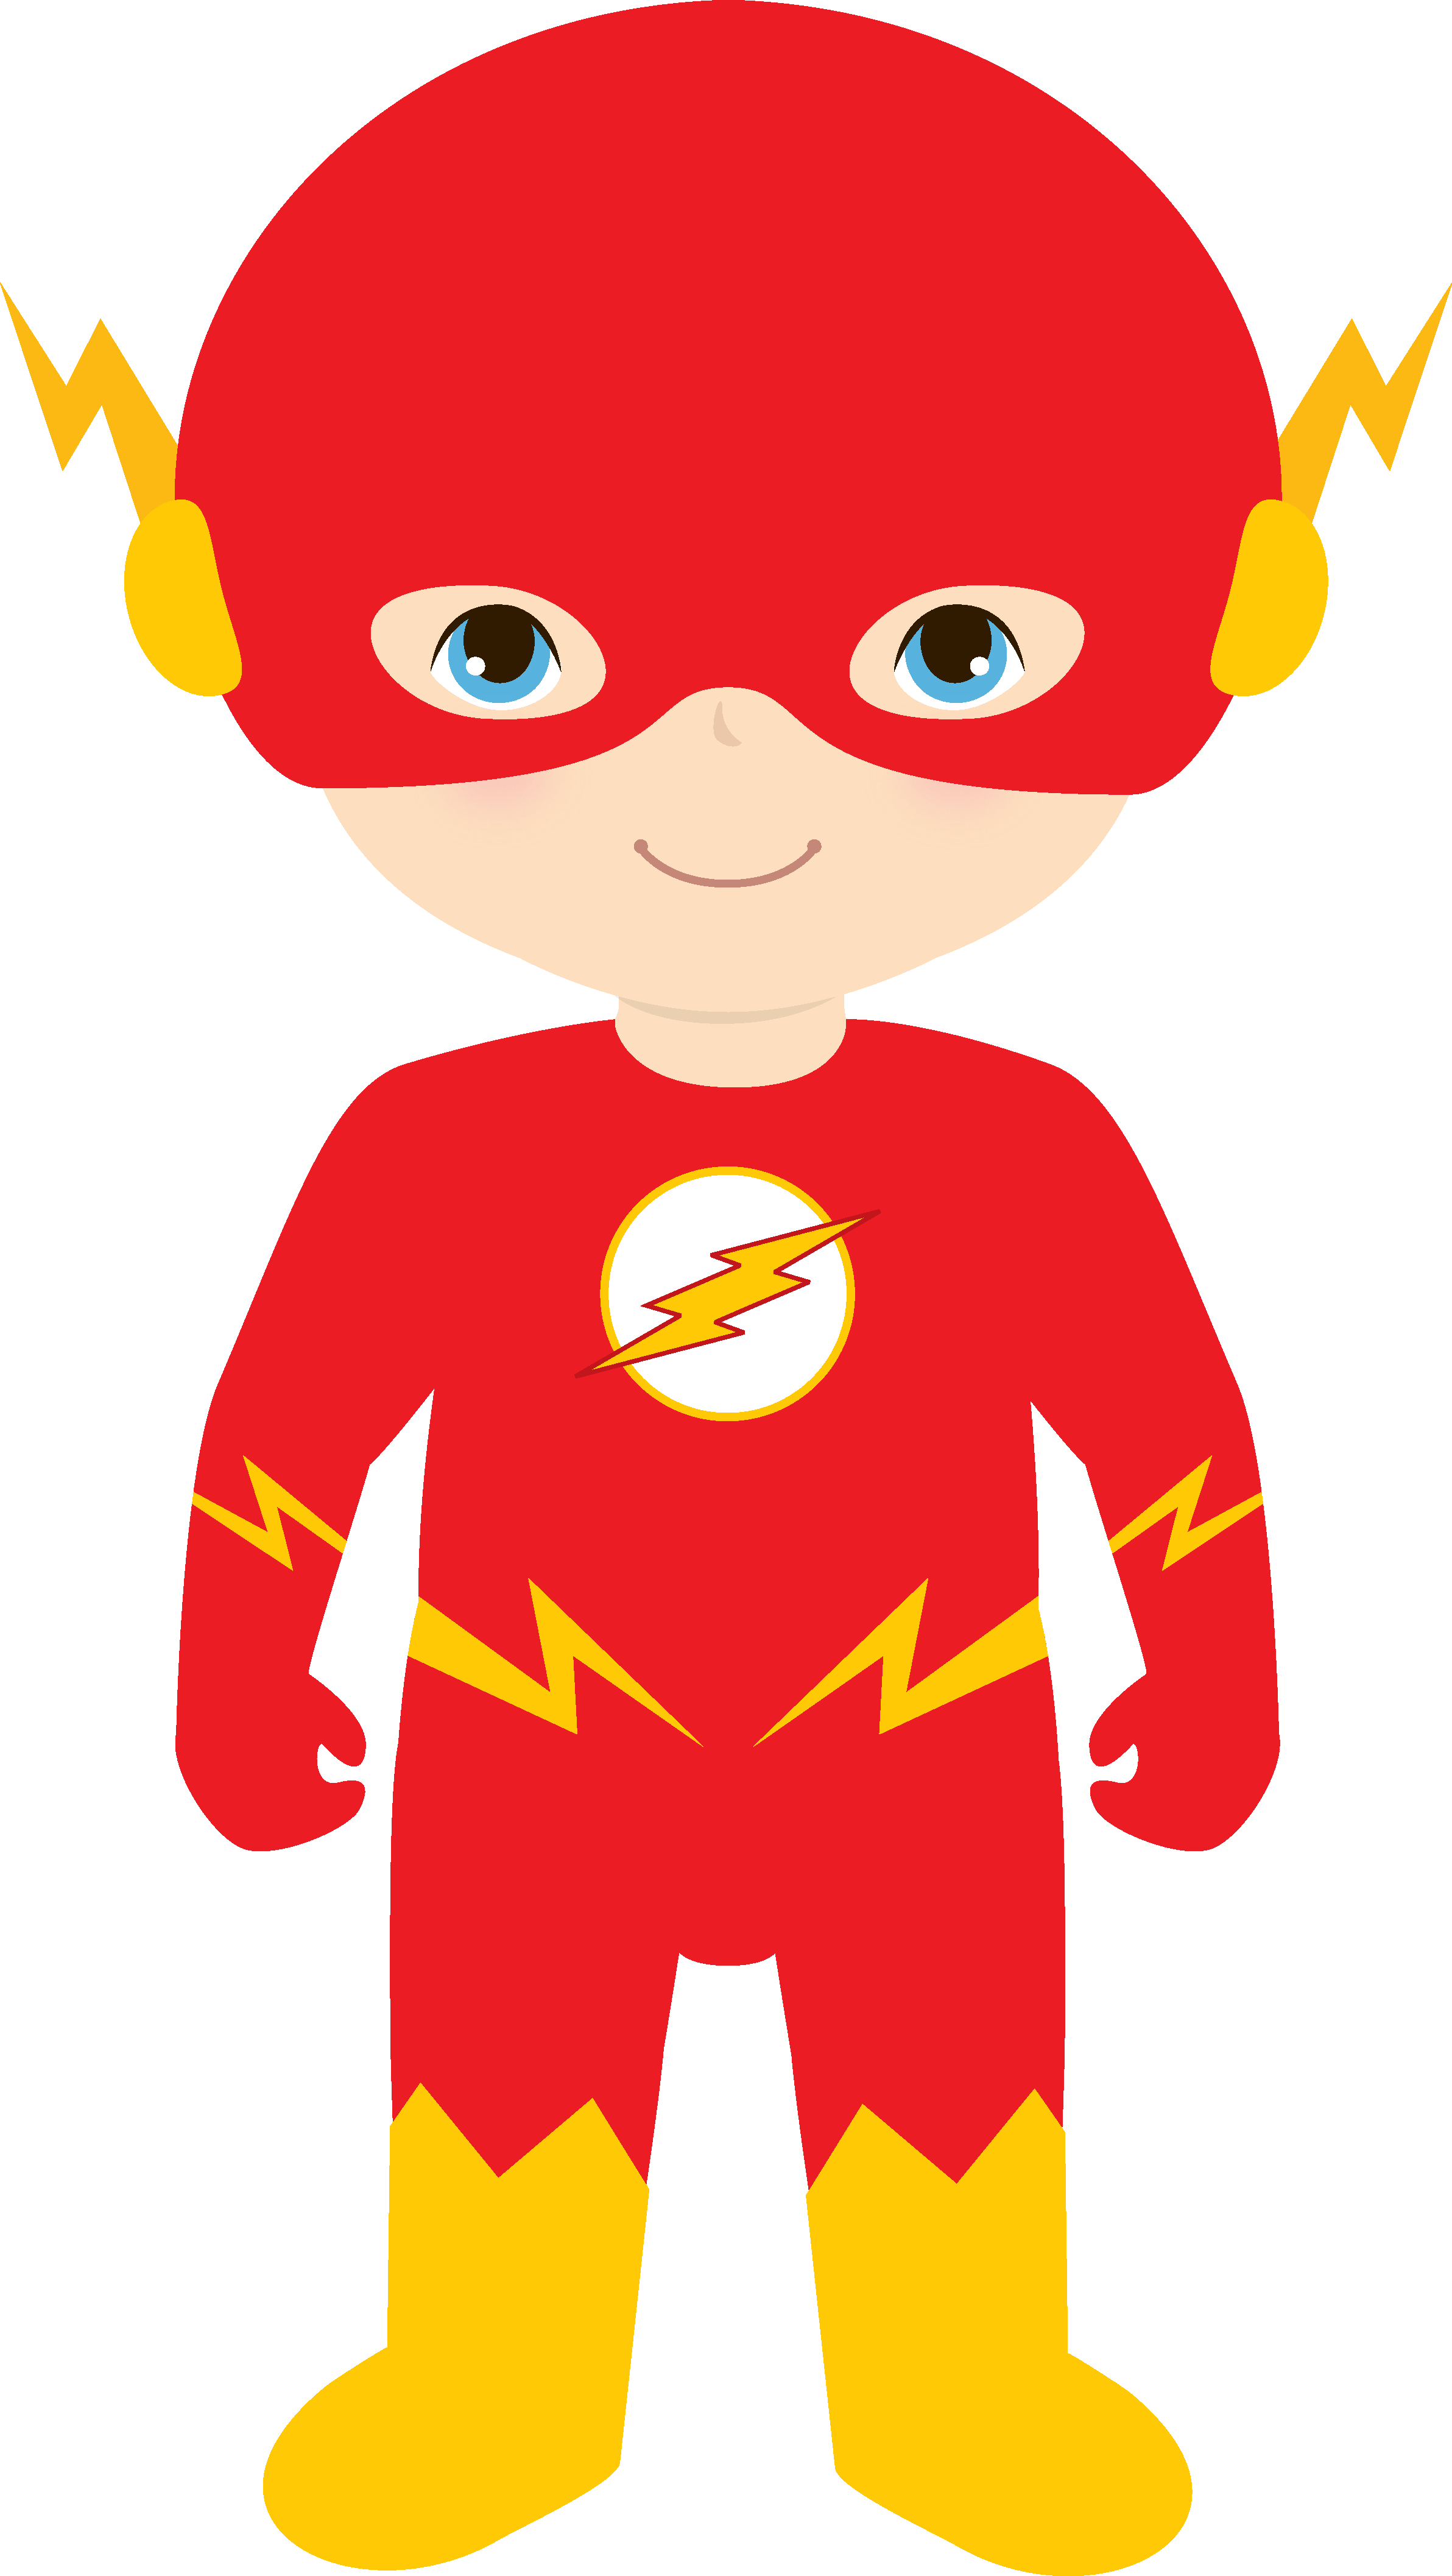 Pin by amy bailey. Water clipart superhero